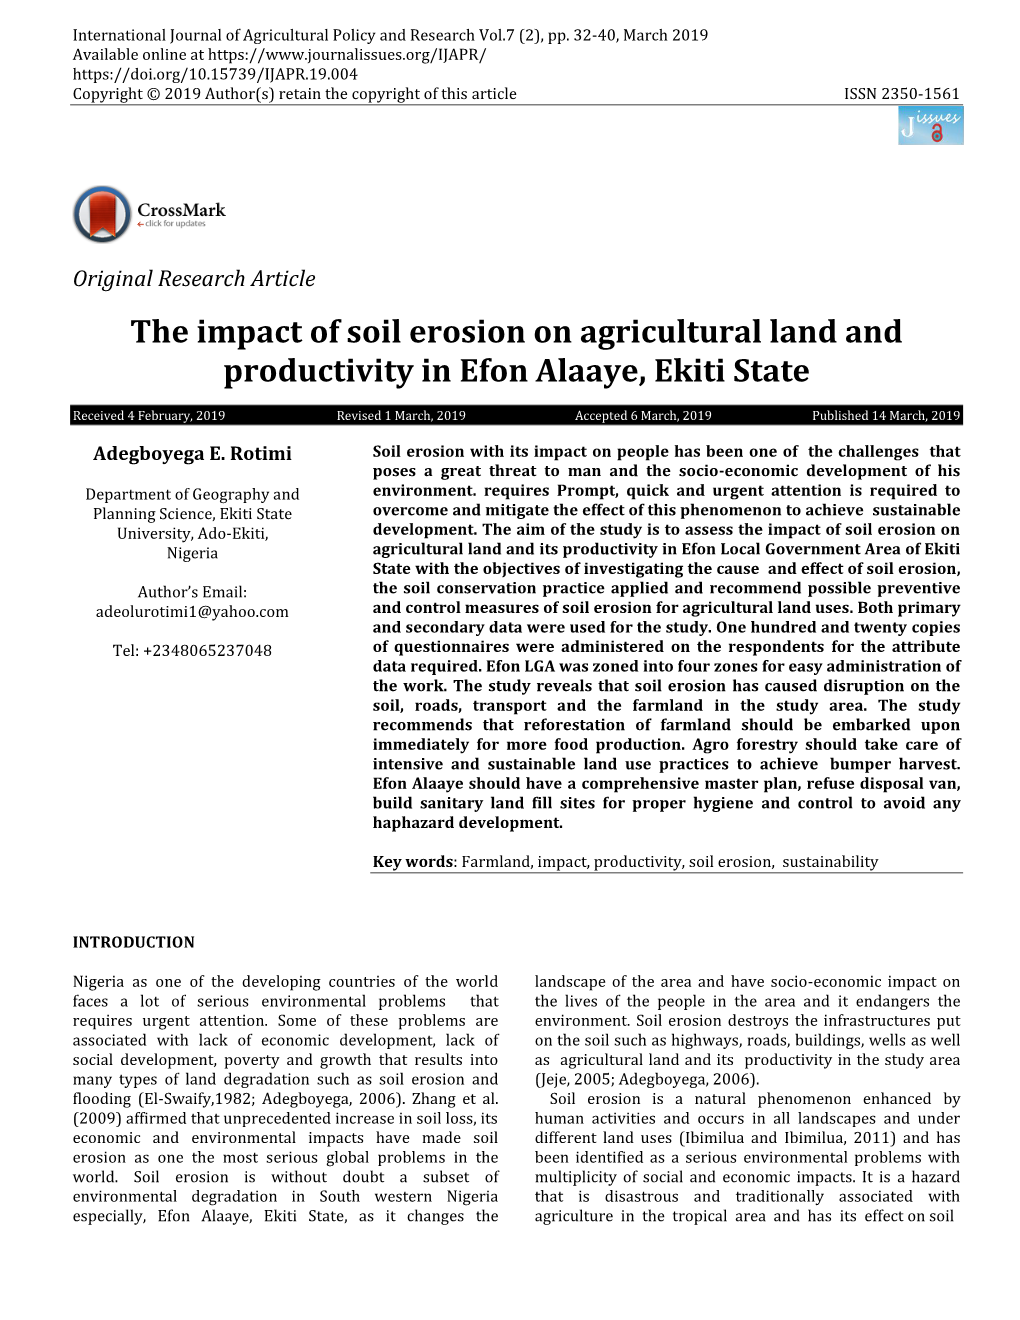 The Impact of Soil Erosion on Agricultural Land and Productivity in Efon Alaaye, Ekiti State